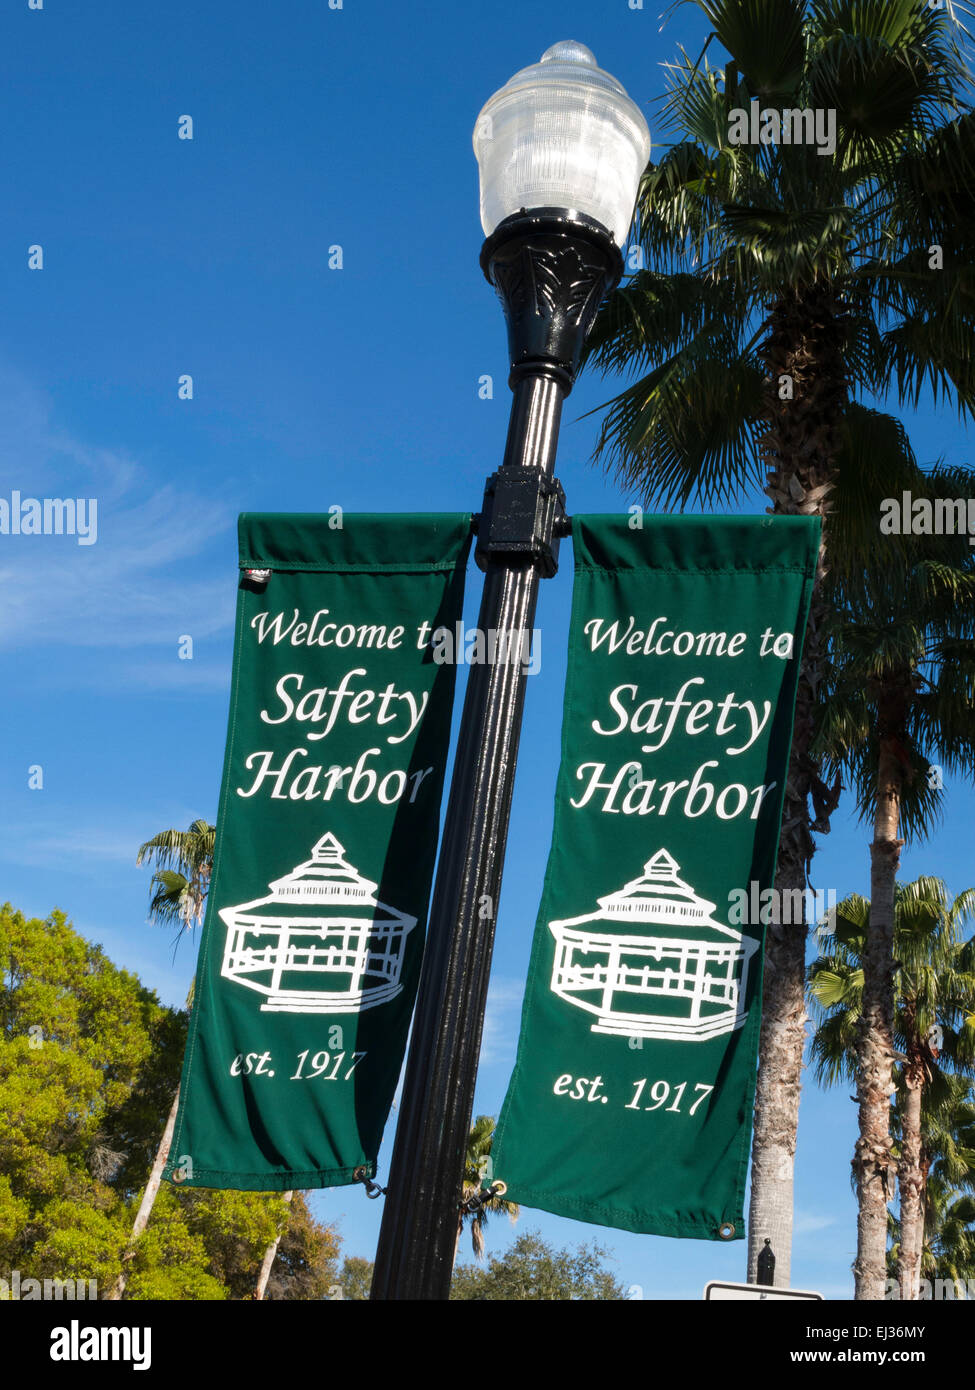 Old Fashioned Street Light with Welcome Banners, Safety Harbor, FL, USA Stock Photo